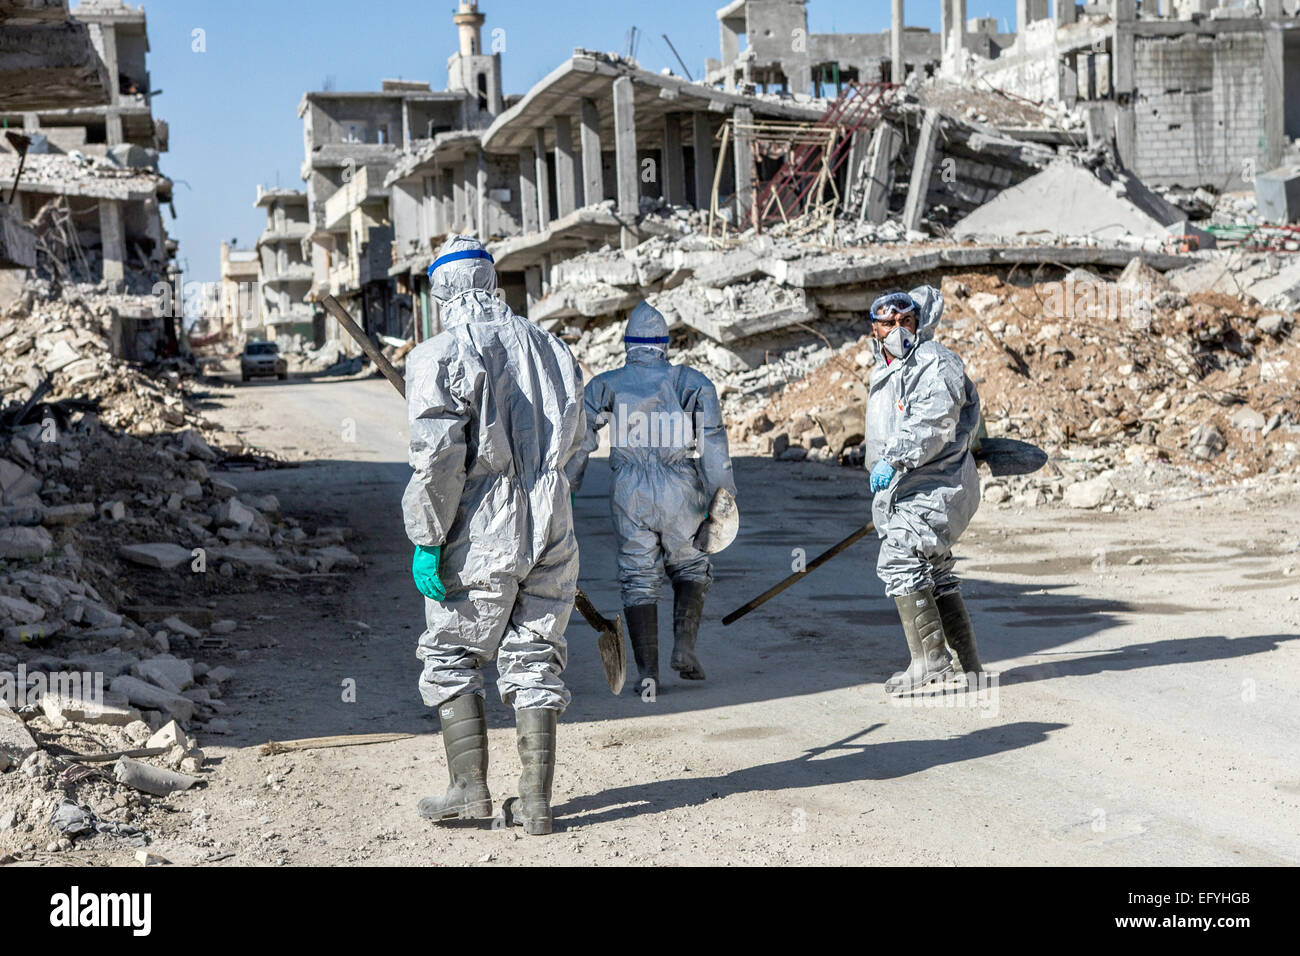 Kobane, Syria. 6th Feb, 2015. A unit of Kurdish YPG fighters wear protective suits as they search the streets for dead bodies and corpses in the ruins of Kobane, Syria, 6 February 2015. The recent fighting between Kurdish fighters and fighters of the so-called Islamic State (IS) has left vast areas of the city of Kobane in ruins. Photo: Sebastian Backhaus/dpa/Alamy Live News Stock Photo